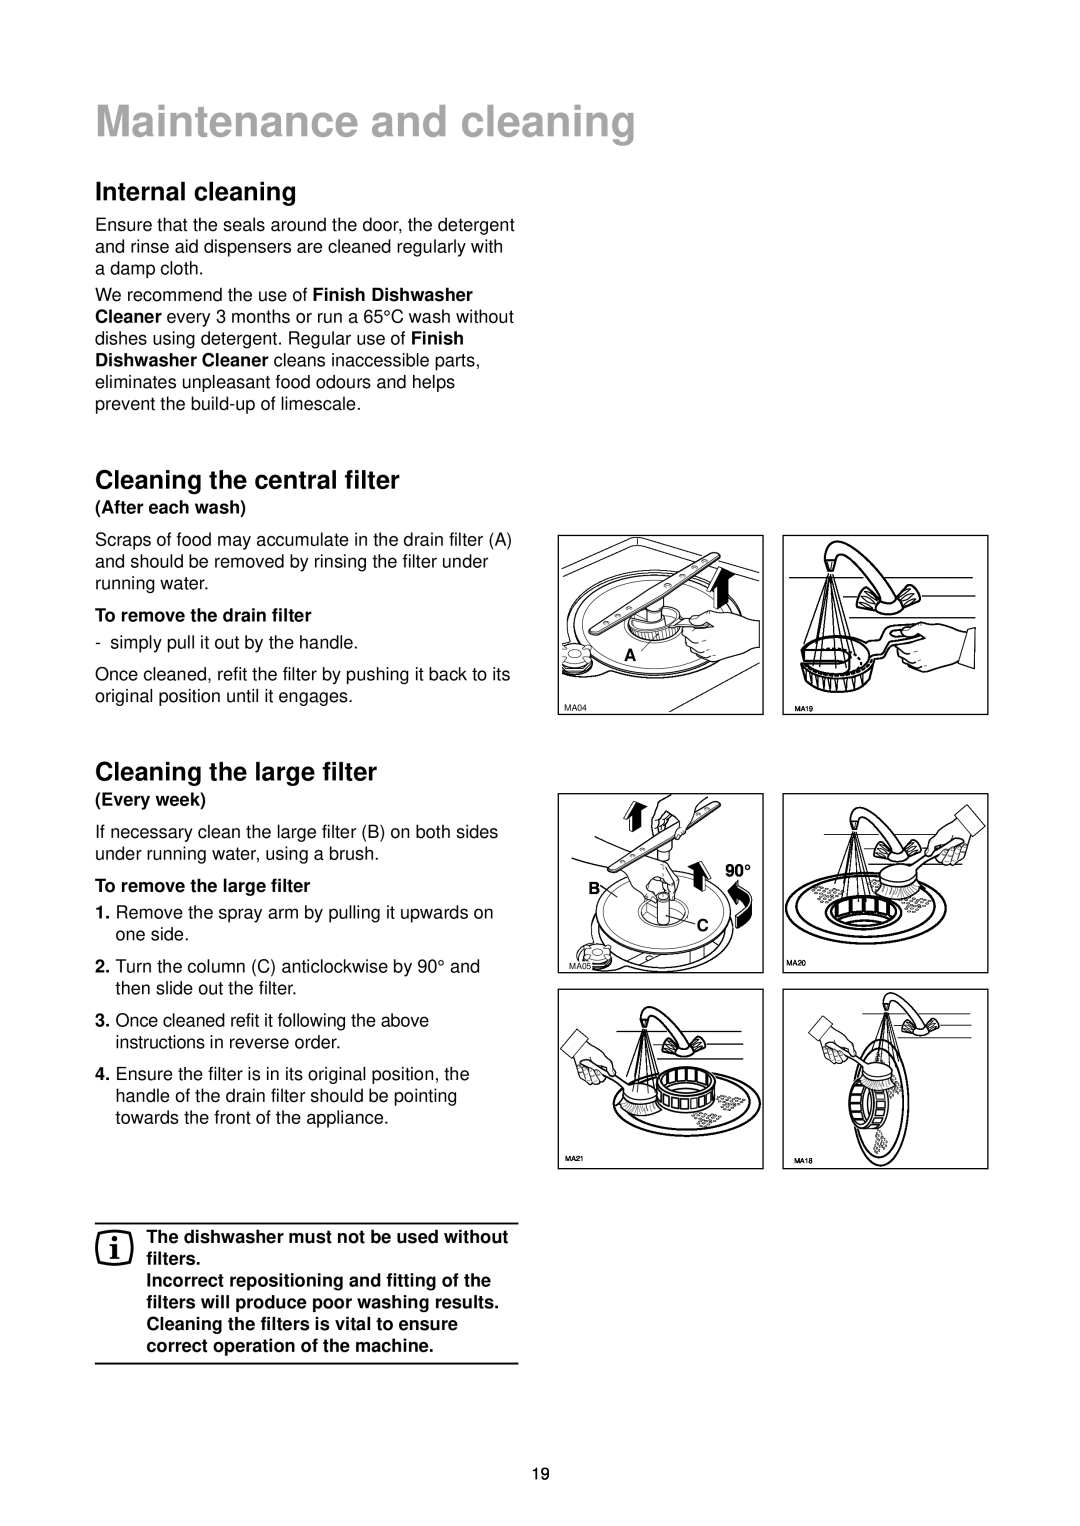 Zanussi DE 6844 A manual Internal cleaning, Cleaning the central filter, Cleaning the large filter, Dishwasher Cleaner 